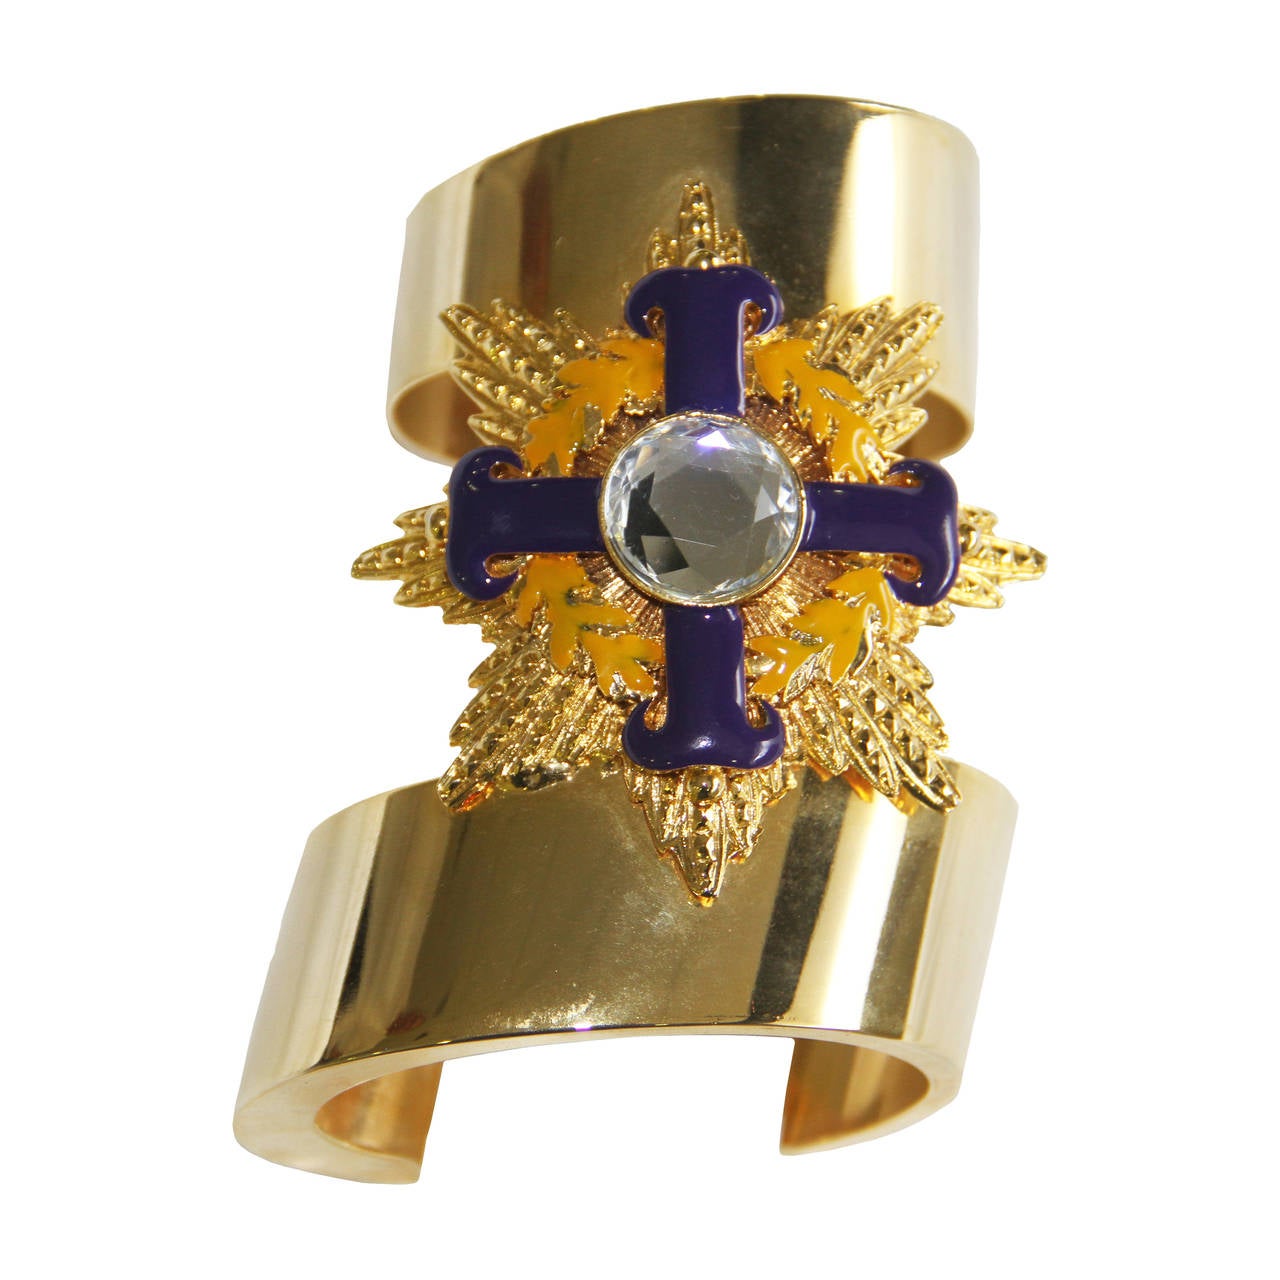 Iconic Gianni Versace Oversized Metal Jewelled Cuff Fall 1991 For Sale